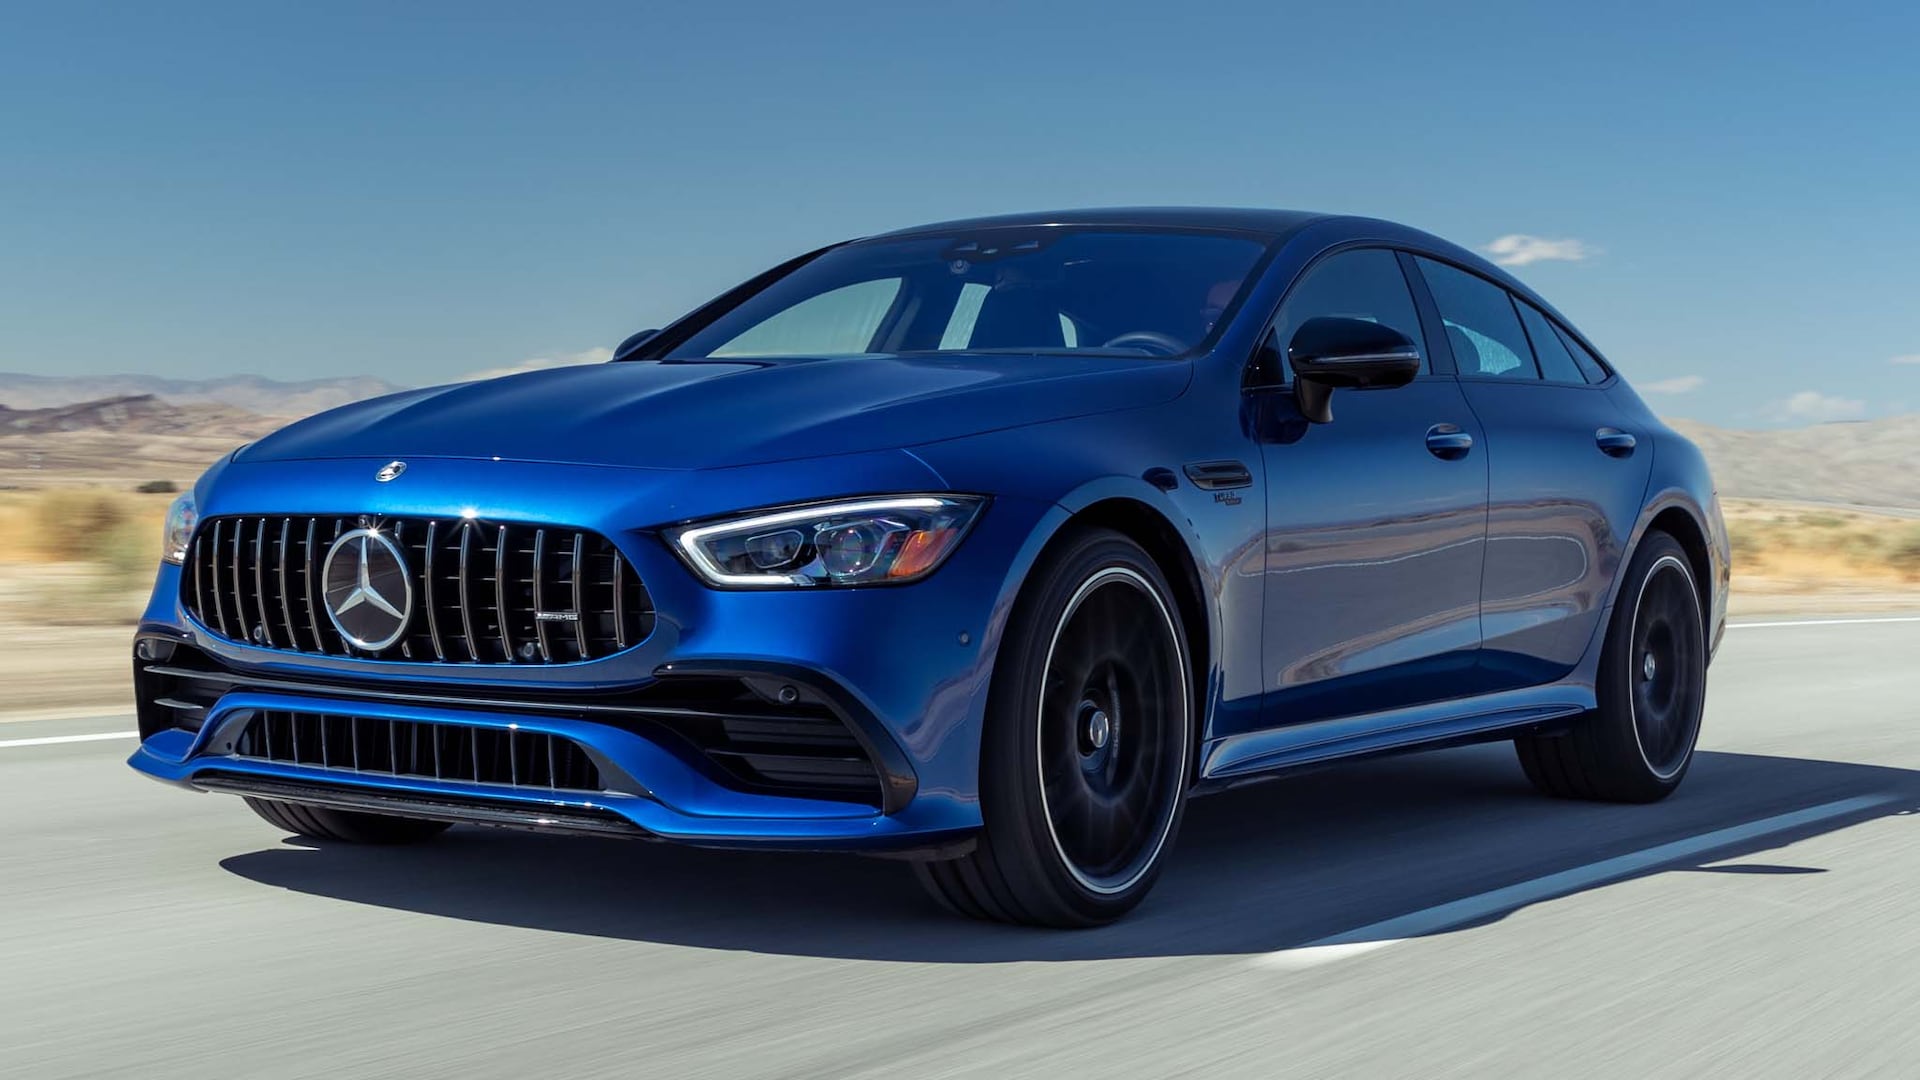 2022 Mercedes-AMG GT53 First Test: The Sporty Daily One